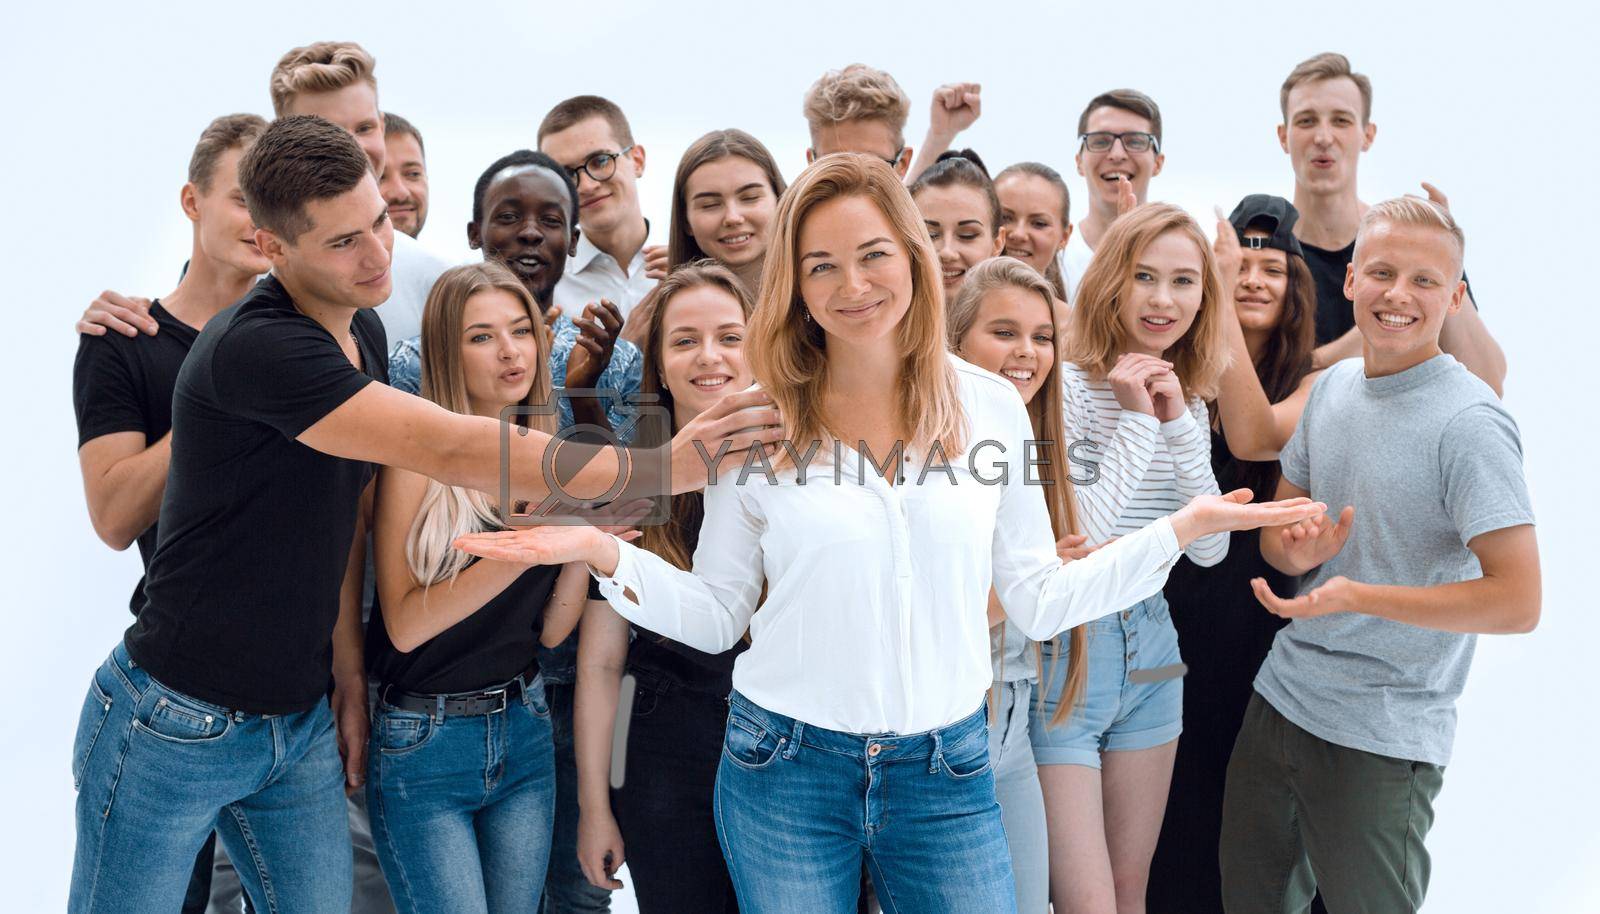 Royalty free image of confident young woman leader standing in front of her associates by asdf